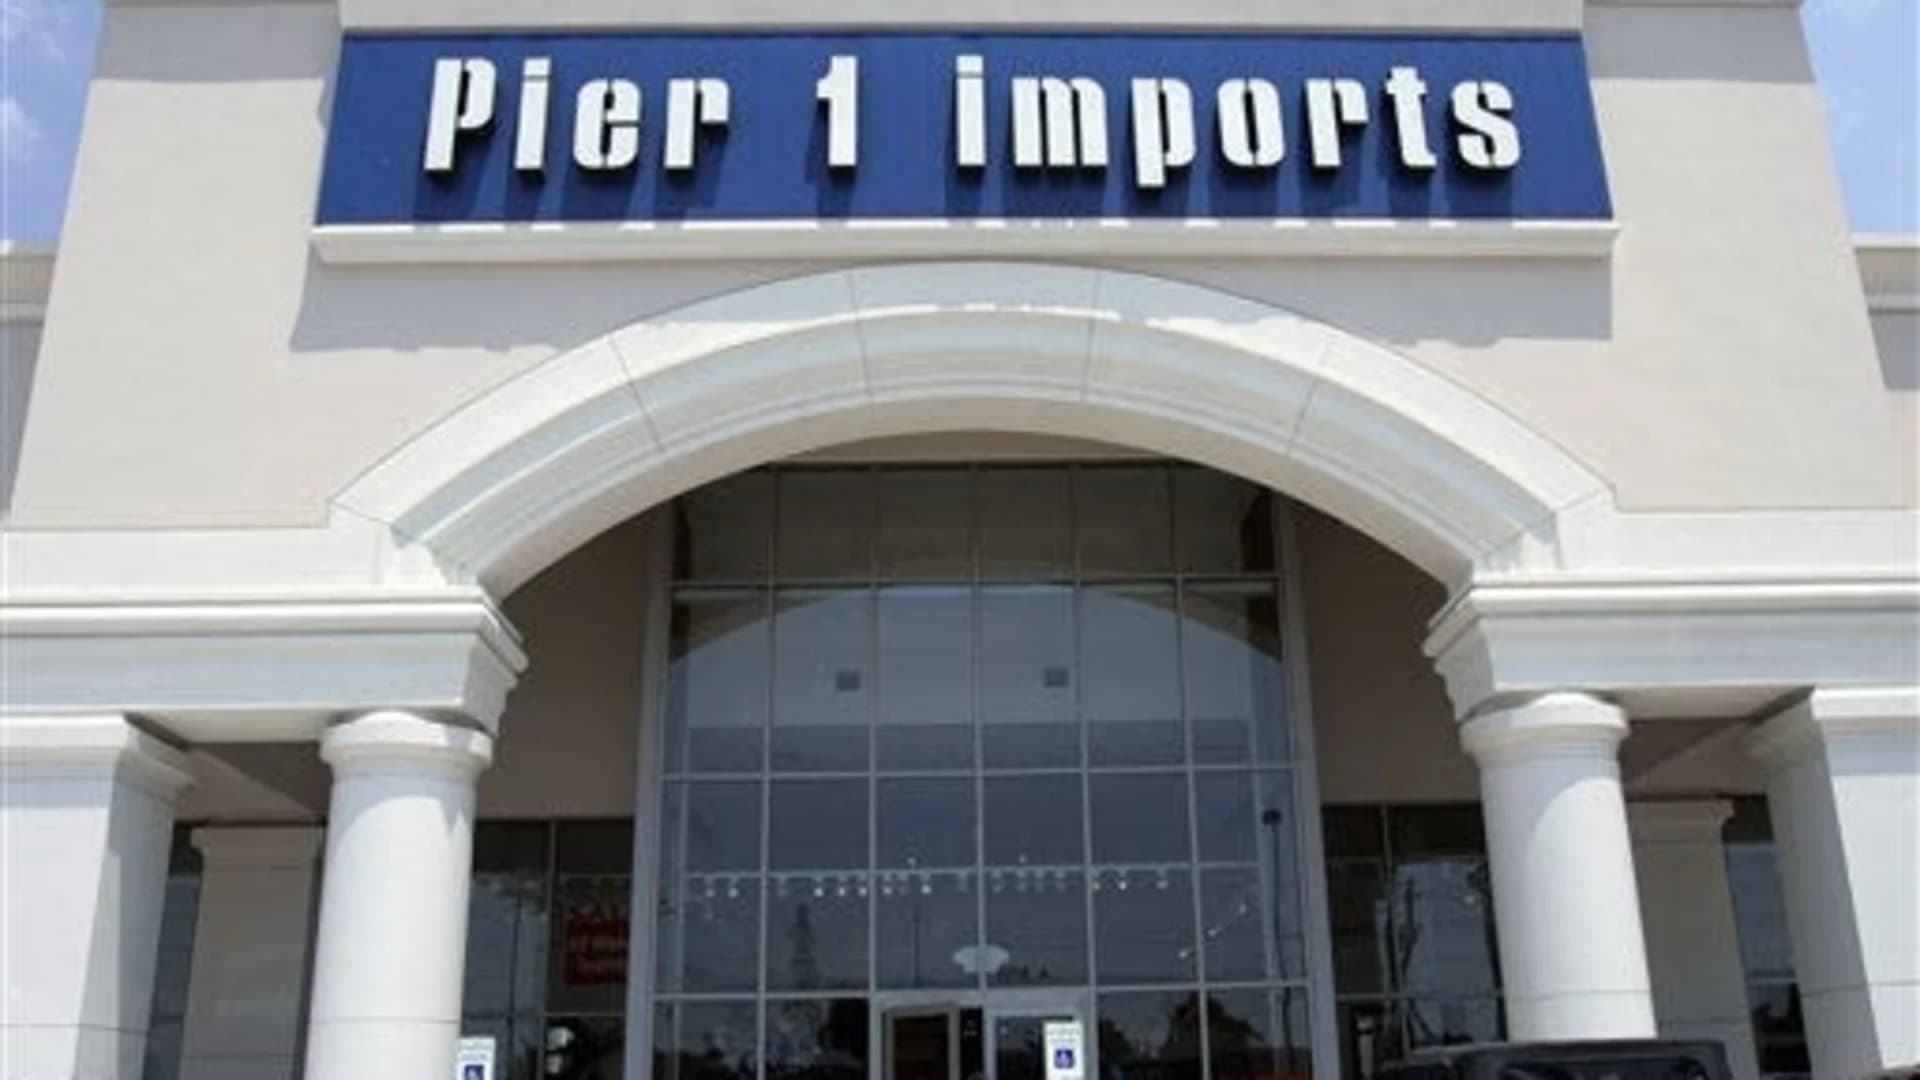 Pier 1 Imports closing nearly half of stores as sales falter